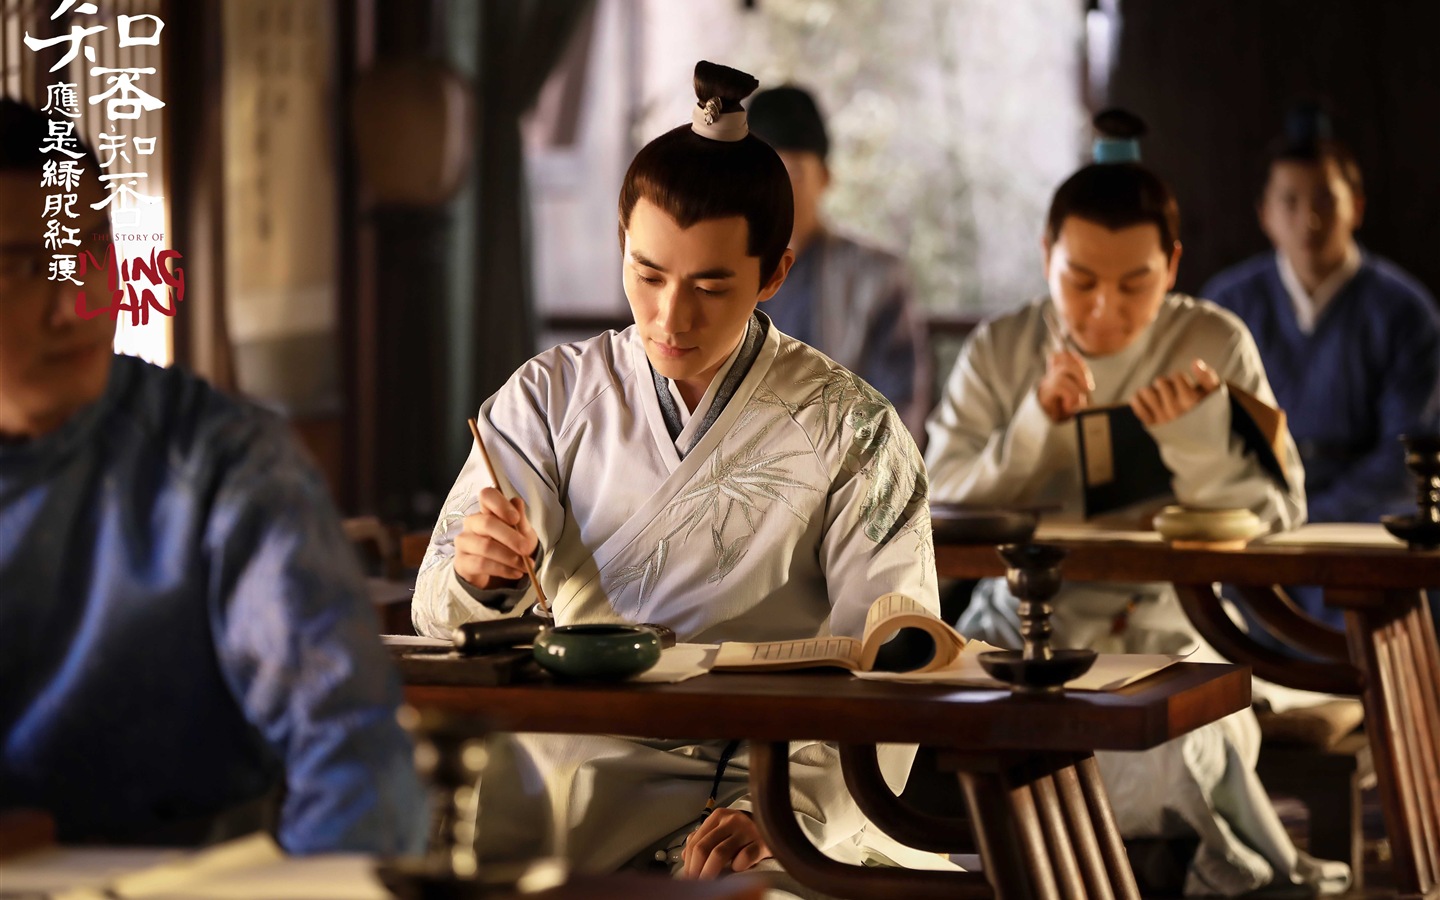 The Story Of MingLan, TV series HD wallpapers #37 - 1440x900